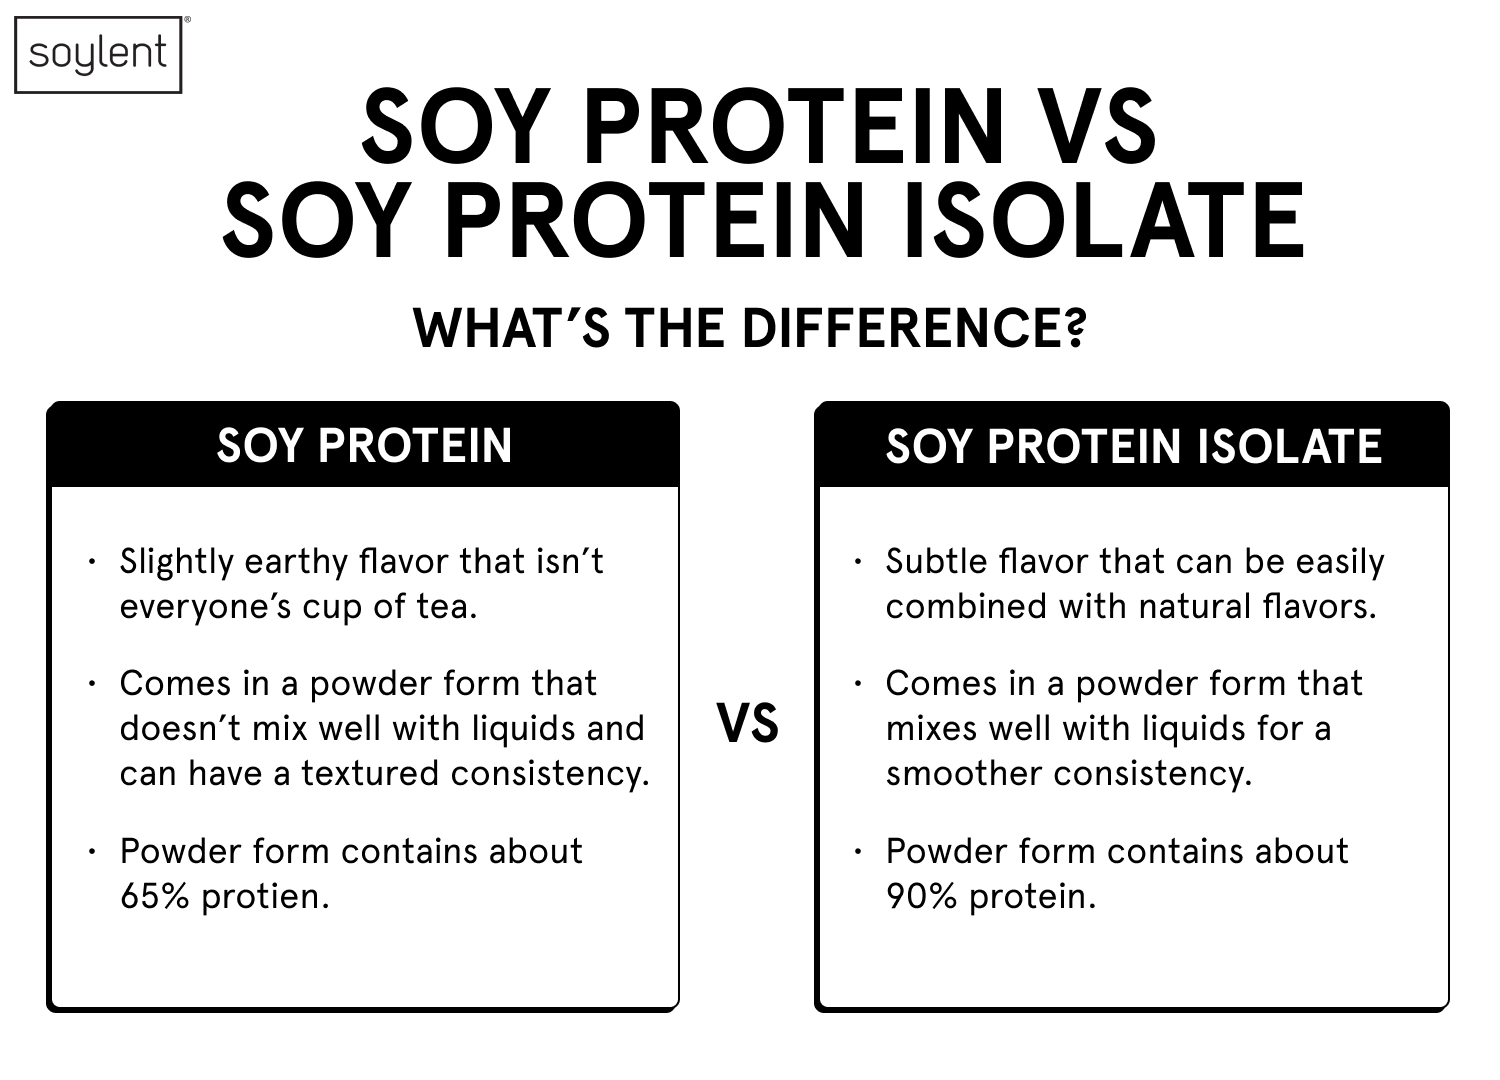 The difference between soy protein and soy isolate by Soylent